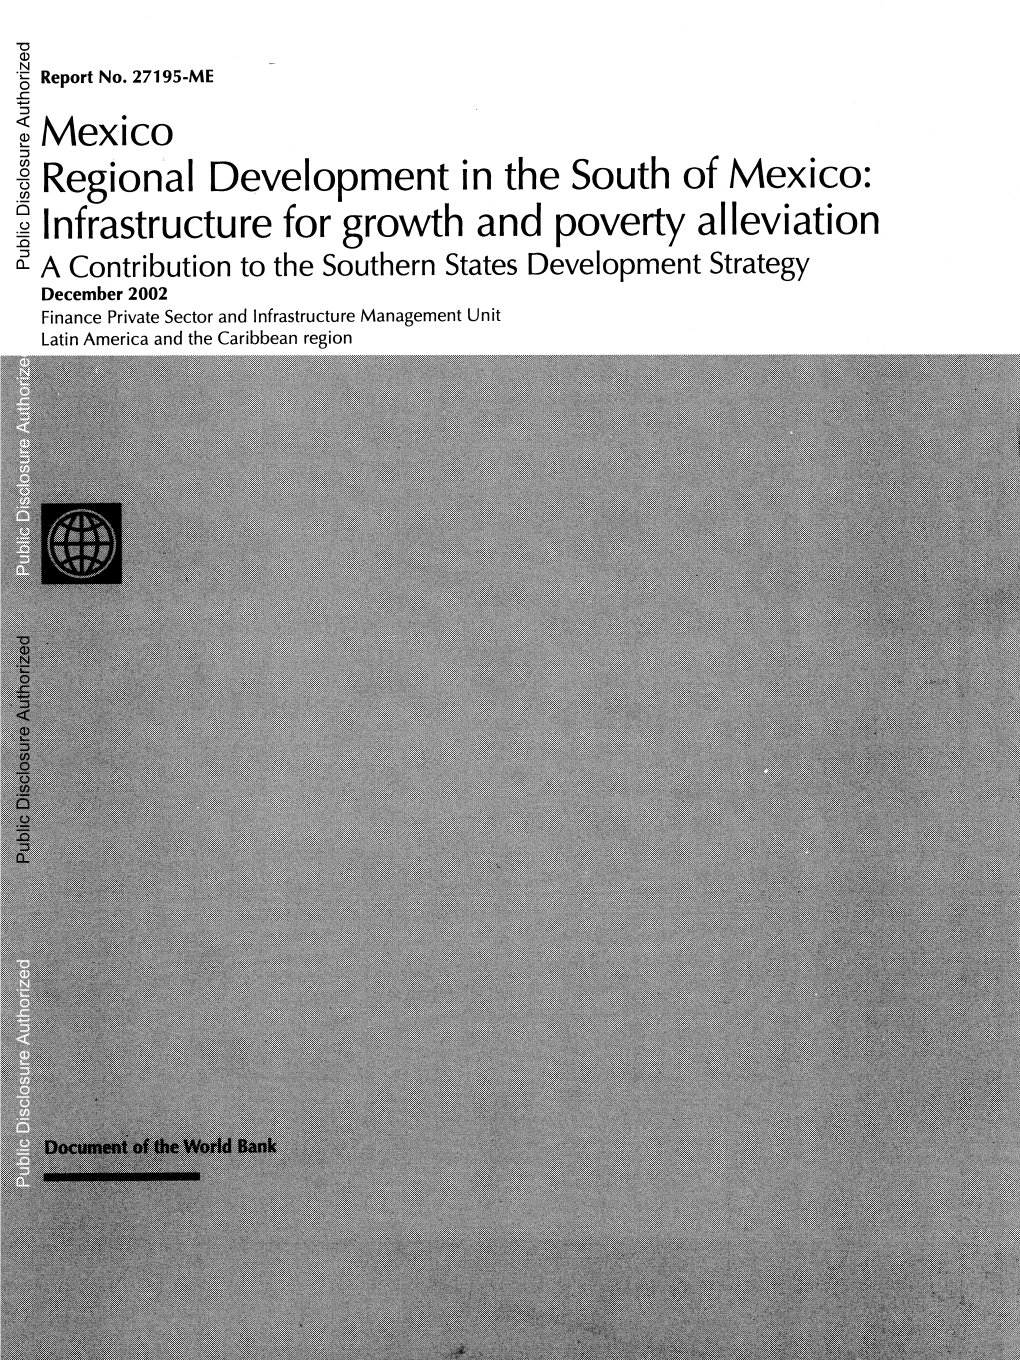 Mexico Regional Development in the South of Mexico: Infrastructure for Growth and Poverty Alleviation